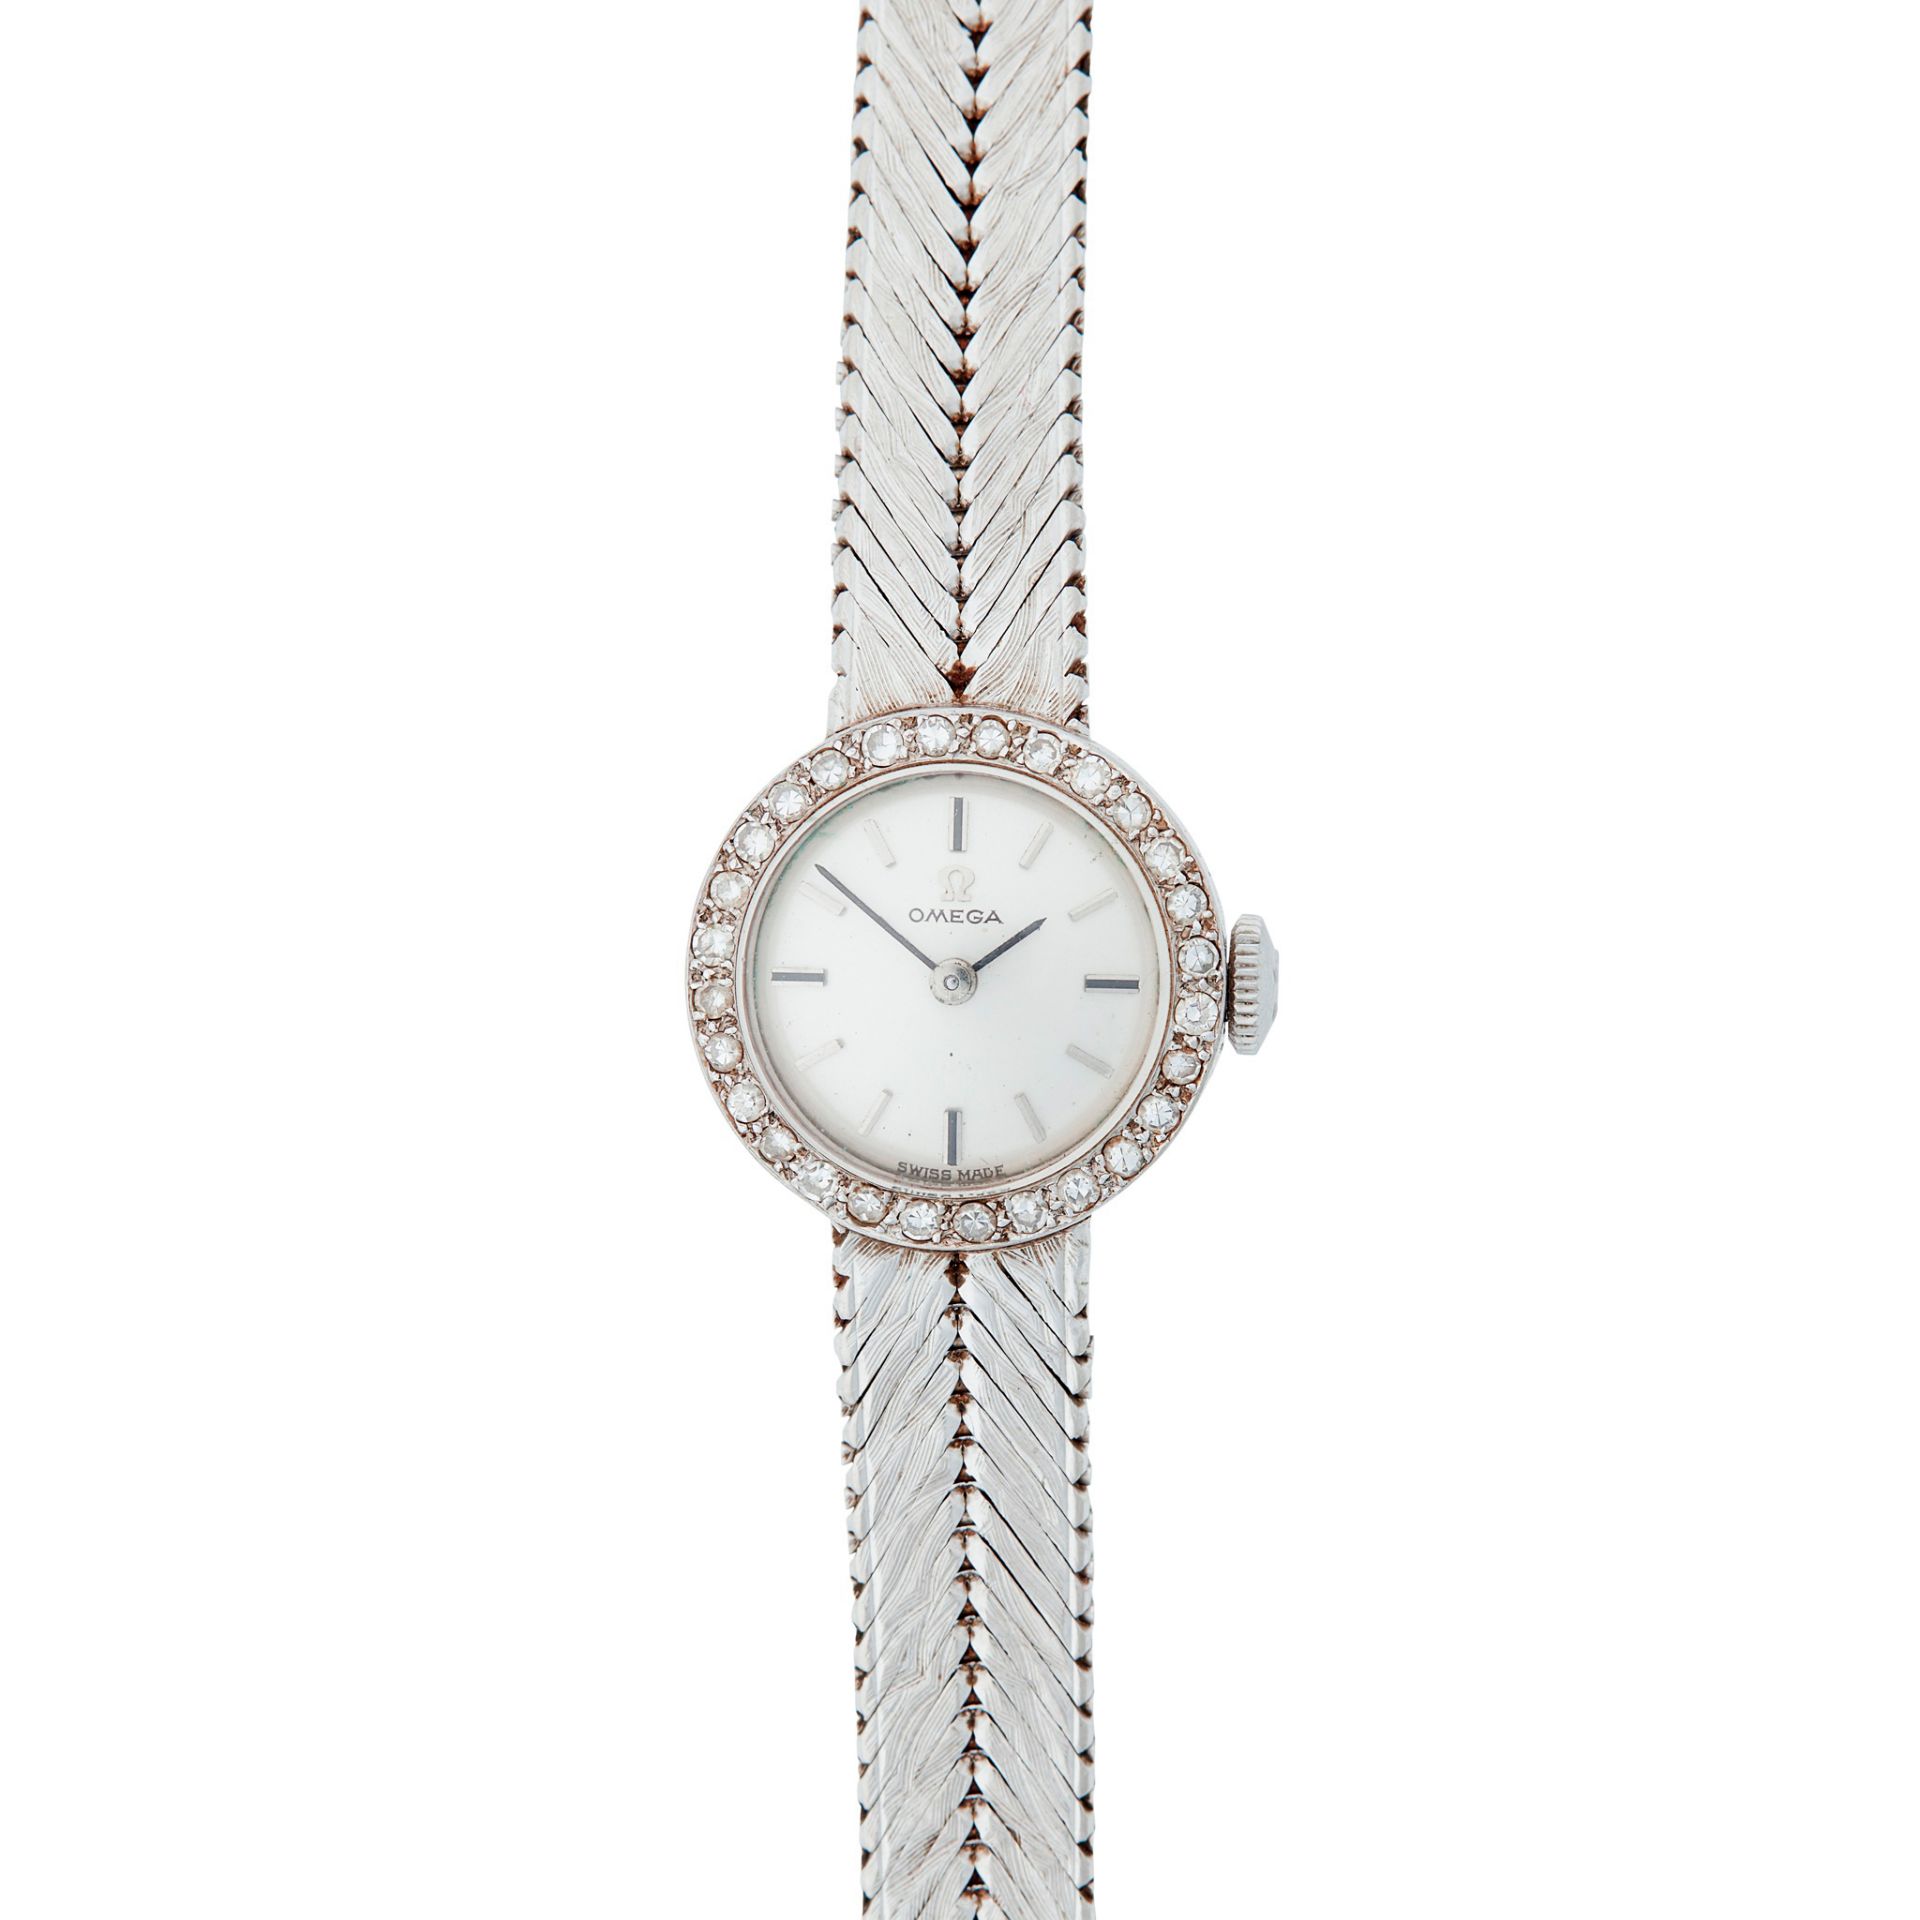 A lady's 18ct white gold diamond cocktail watch, Omega